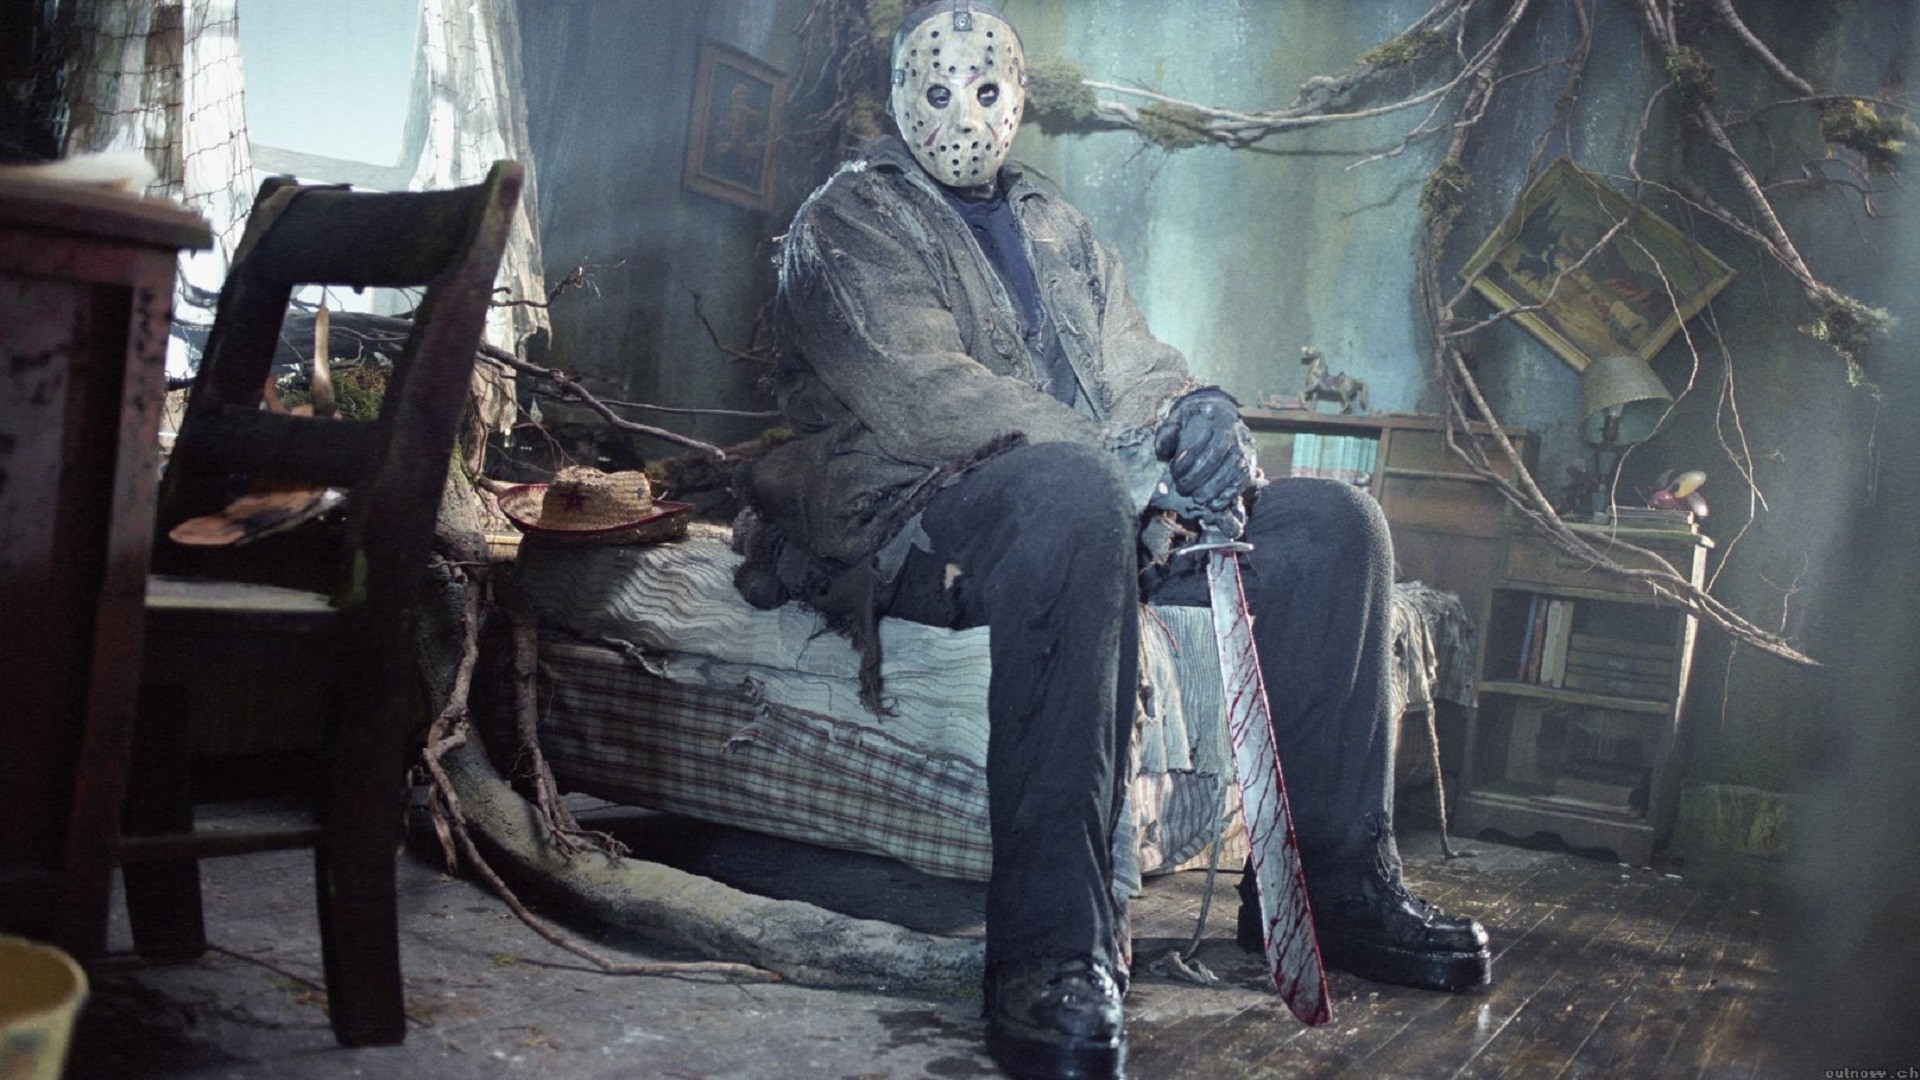 17 Friday The 13th (2009) HD Wallpapers